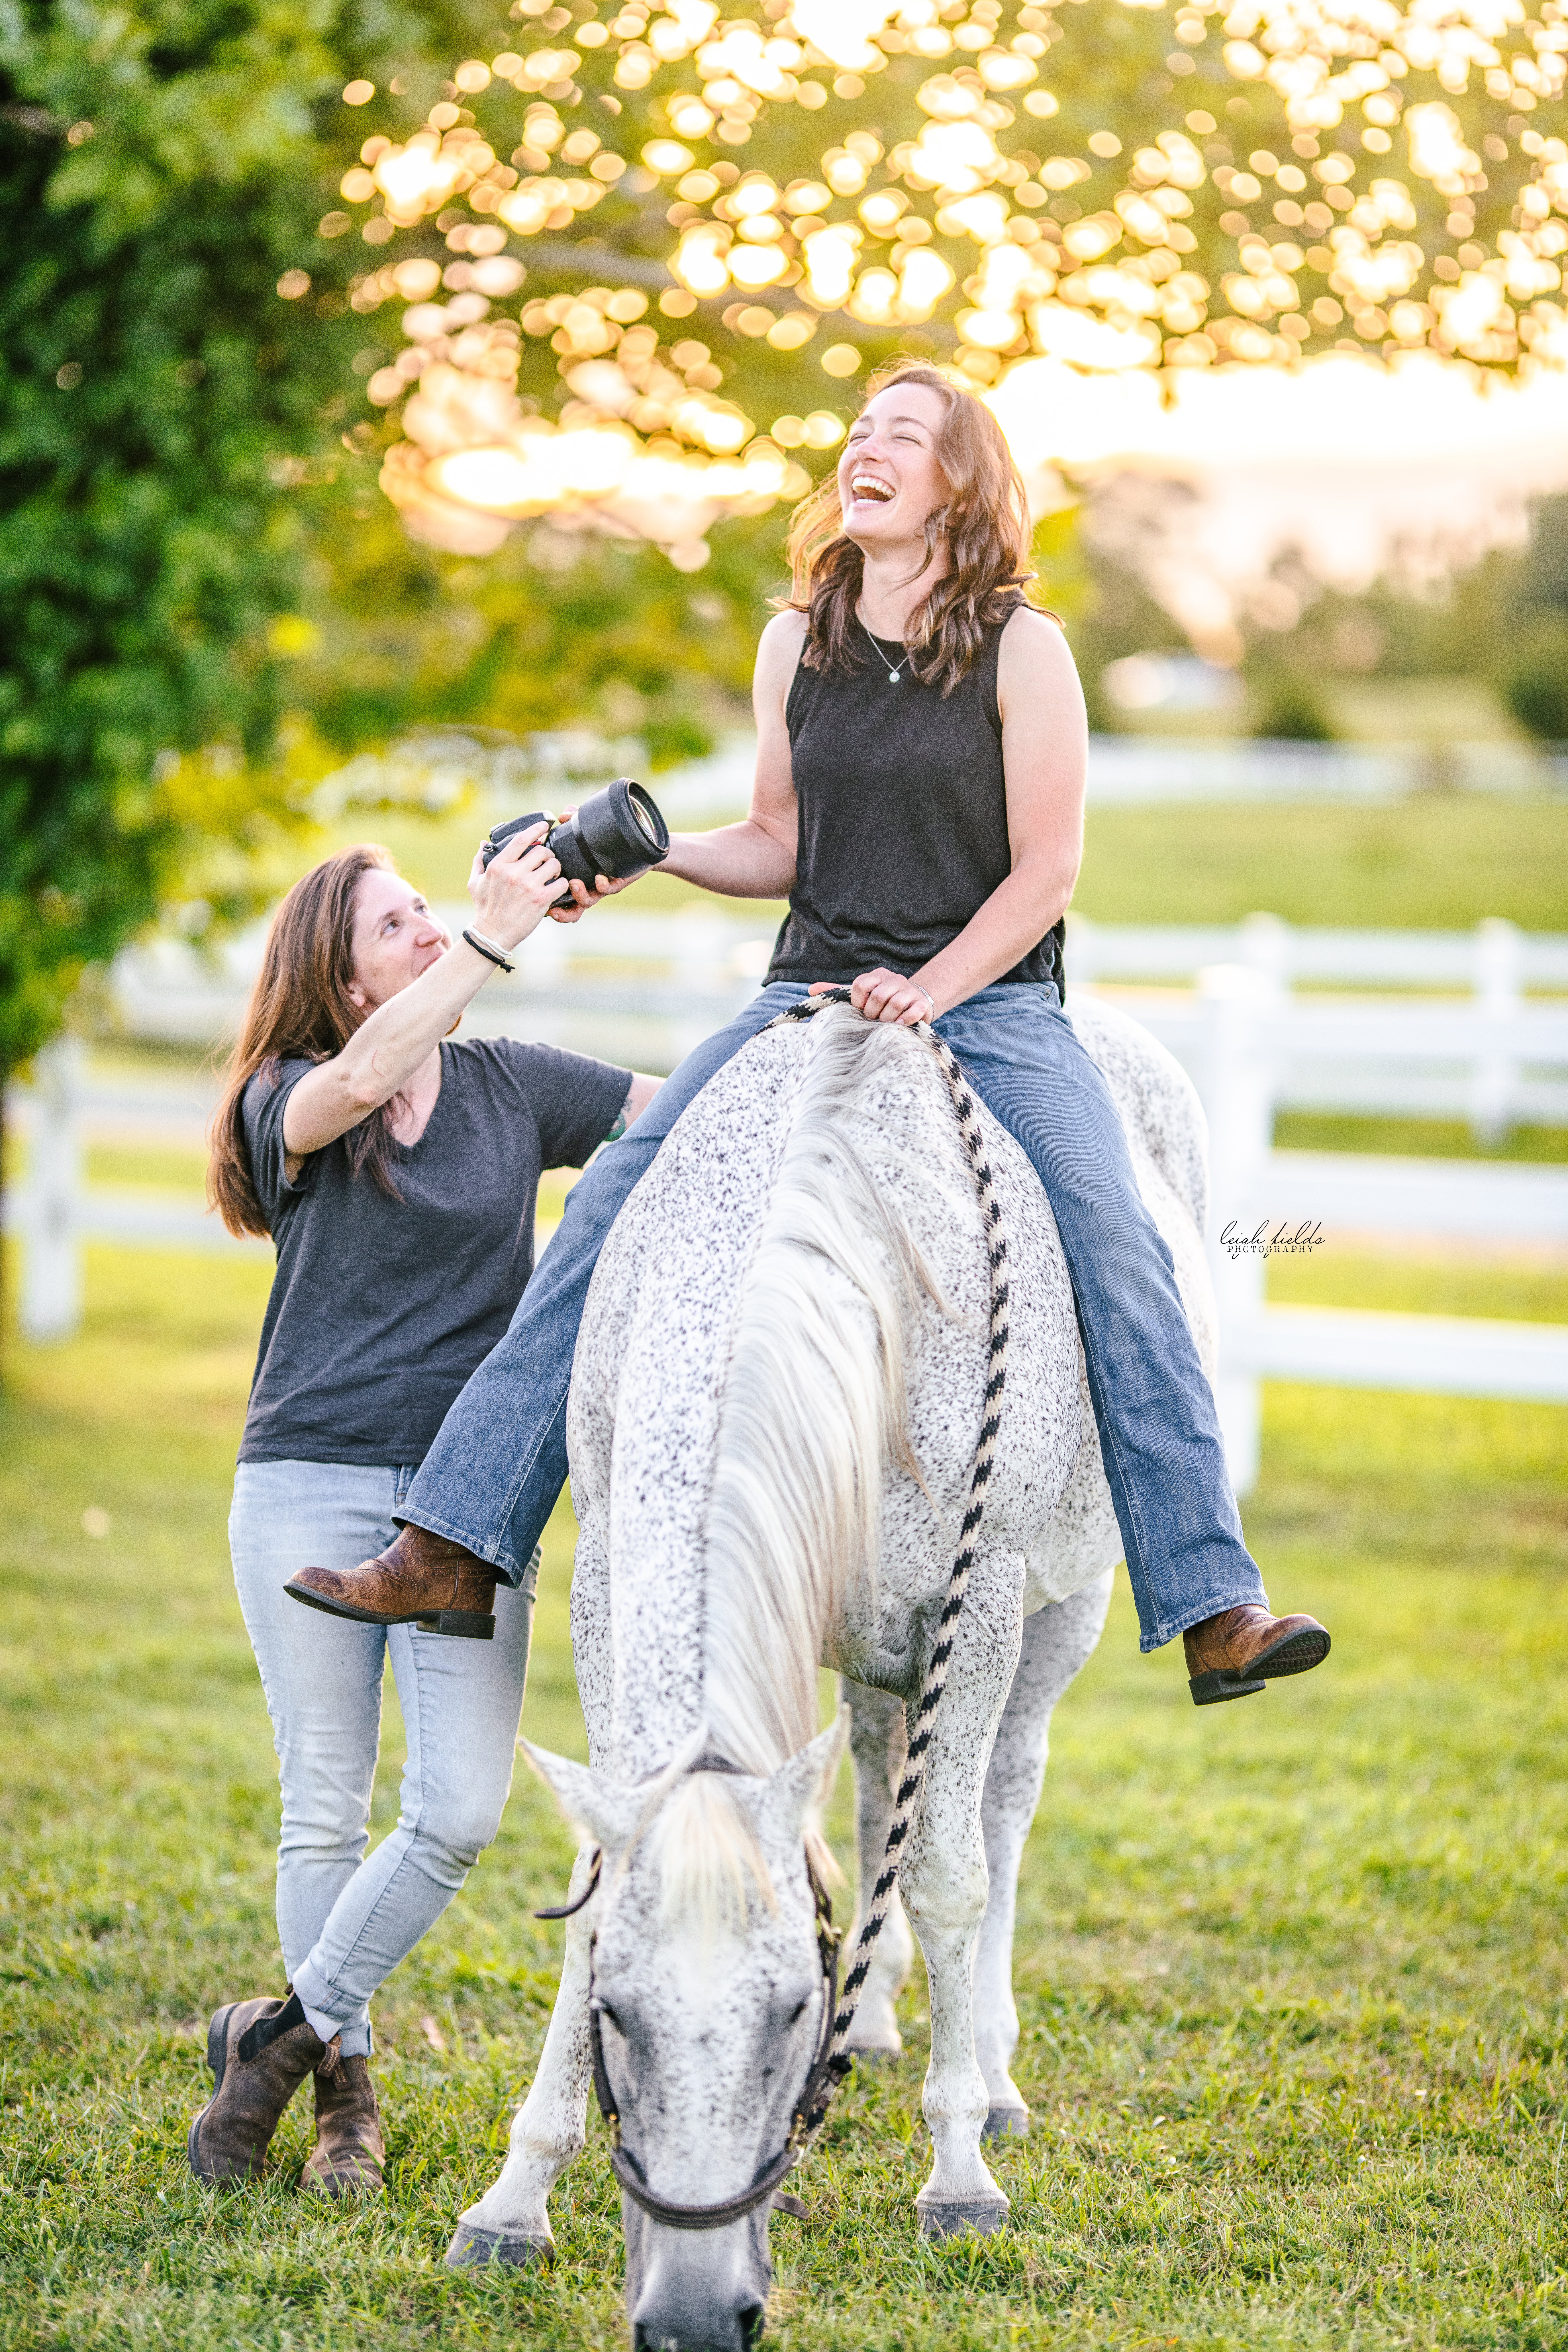 High Caliber Stables equine photographer North Carolina Equine Photographer Leigh Fields Photography